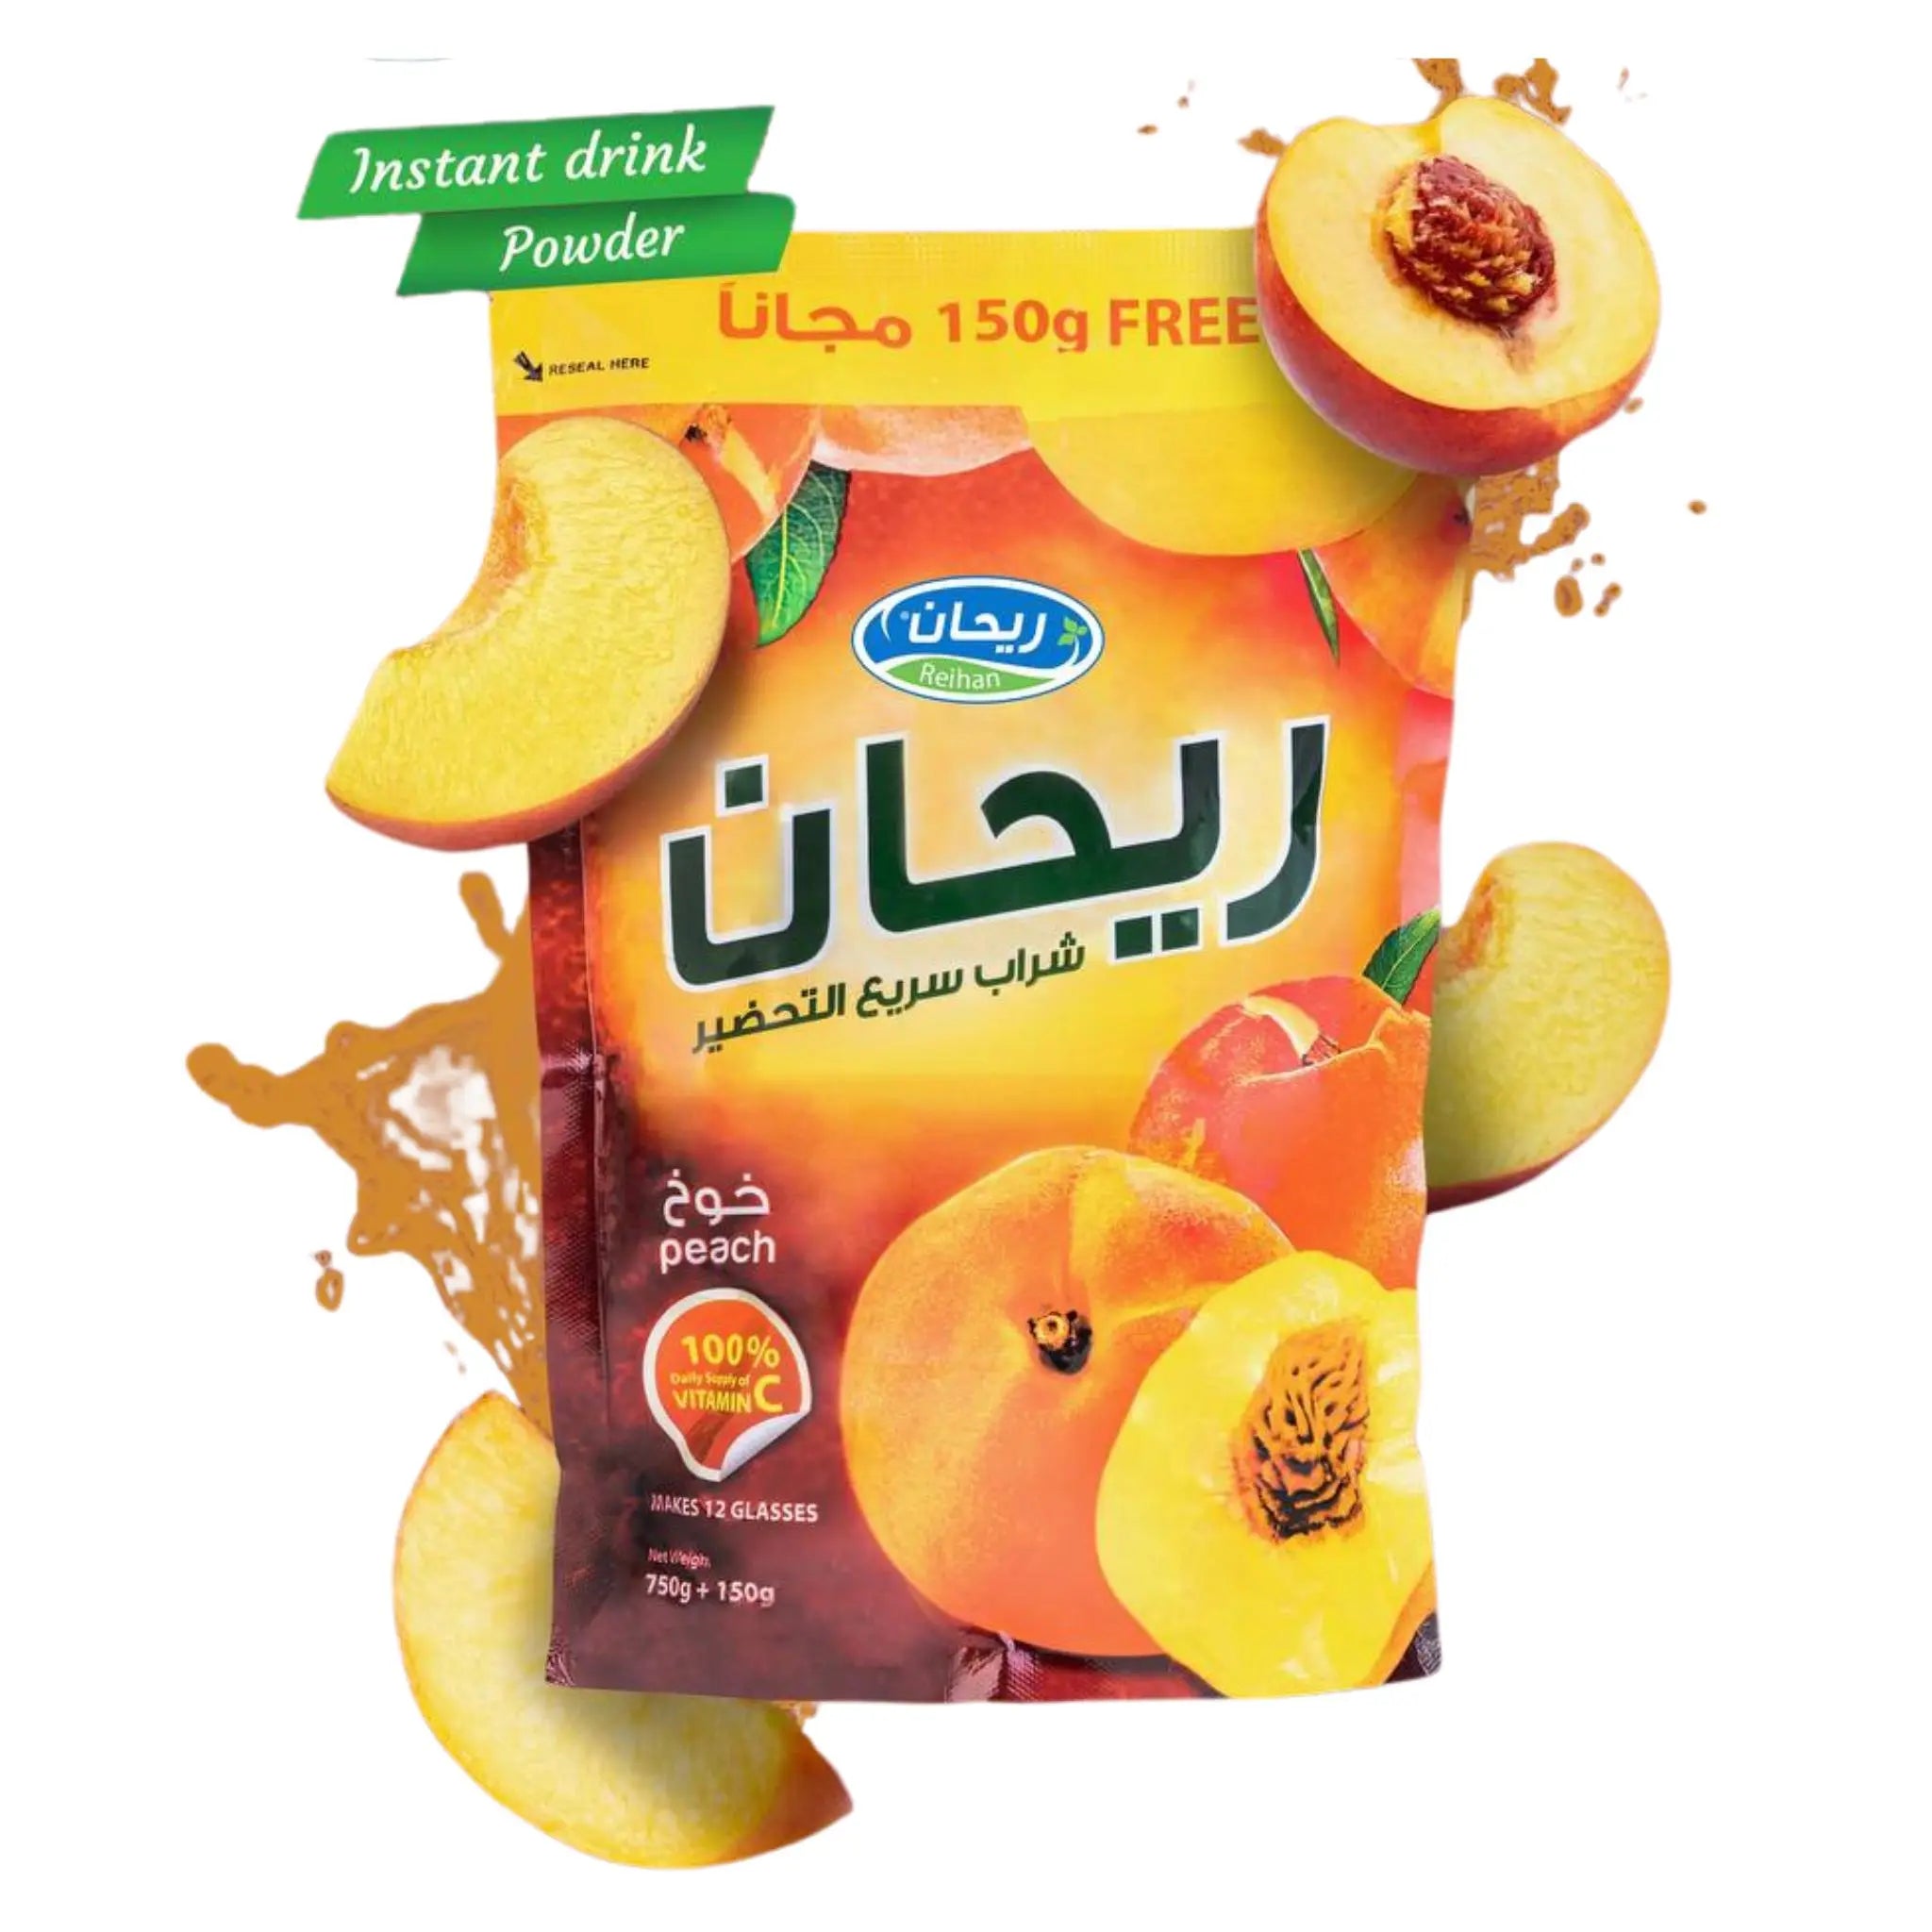 REIHAN INSTANT DRINK PEACH FLAVOUR 900G [POUCH] - Pack of 5 Marino.AE